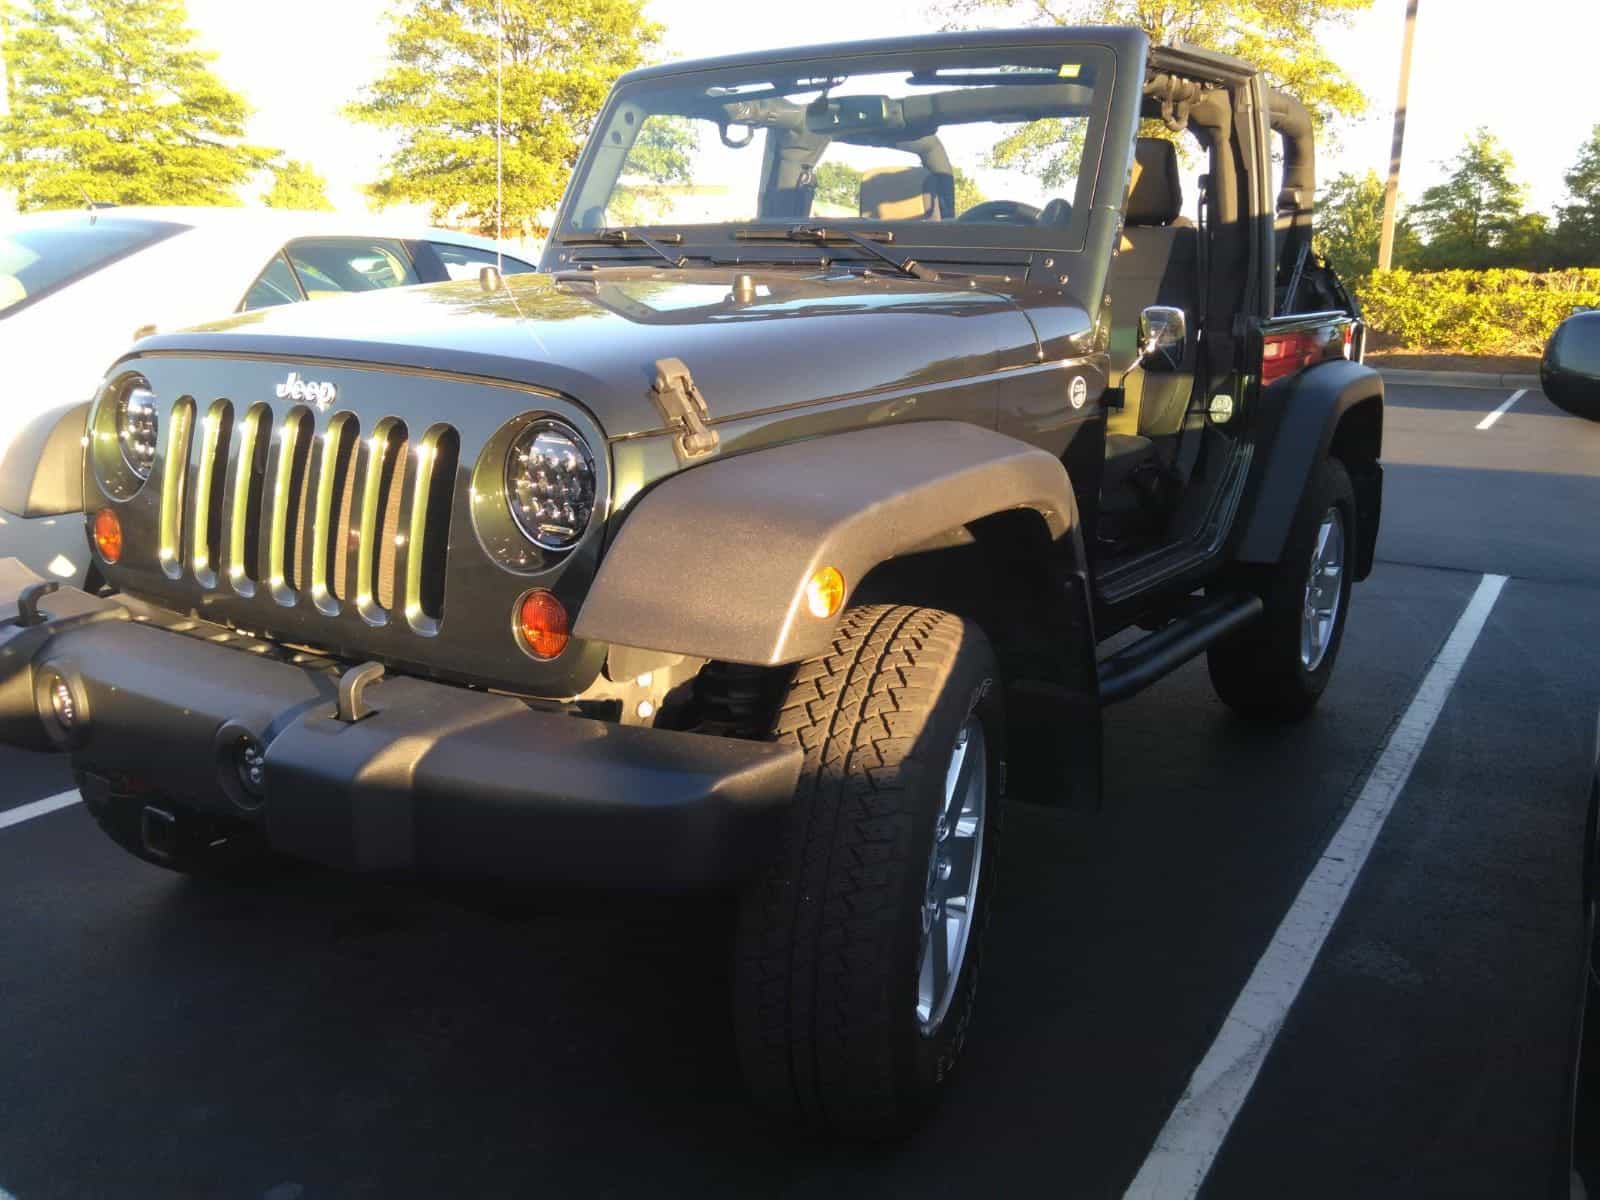 2012 Jeep Wrangler - 2012 Wrangler Manual.  Lot's of Upgrades - Used - VIN 1C4AJWAG4CL101688 - 28,500 Miles - 6 cyl - 4WD - Manual - Truck - Other - Charlotte, NC 28273, United States